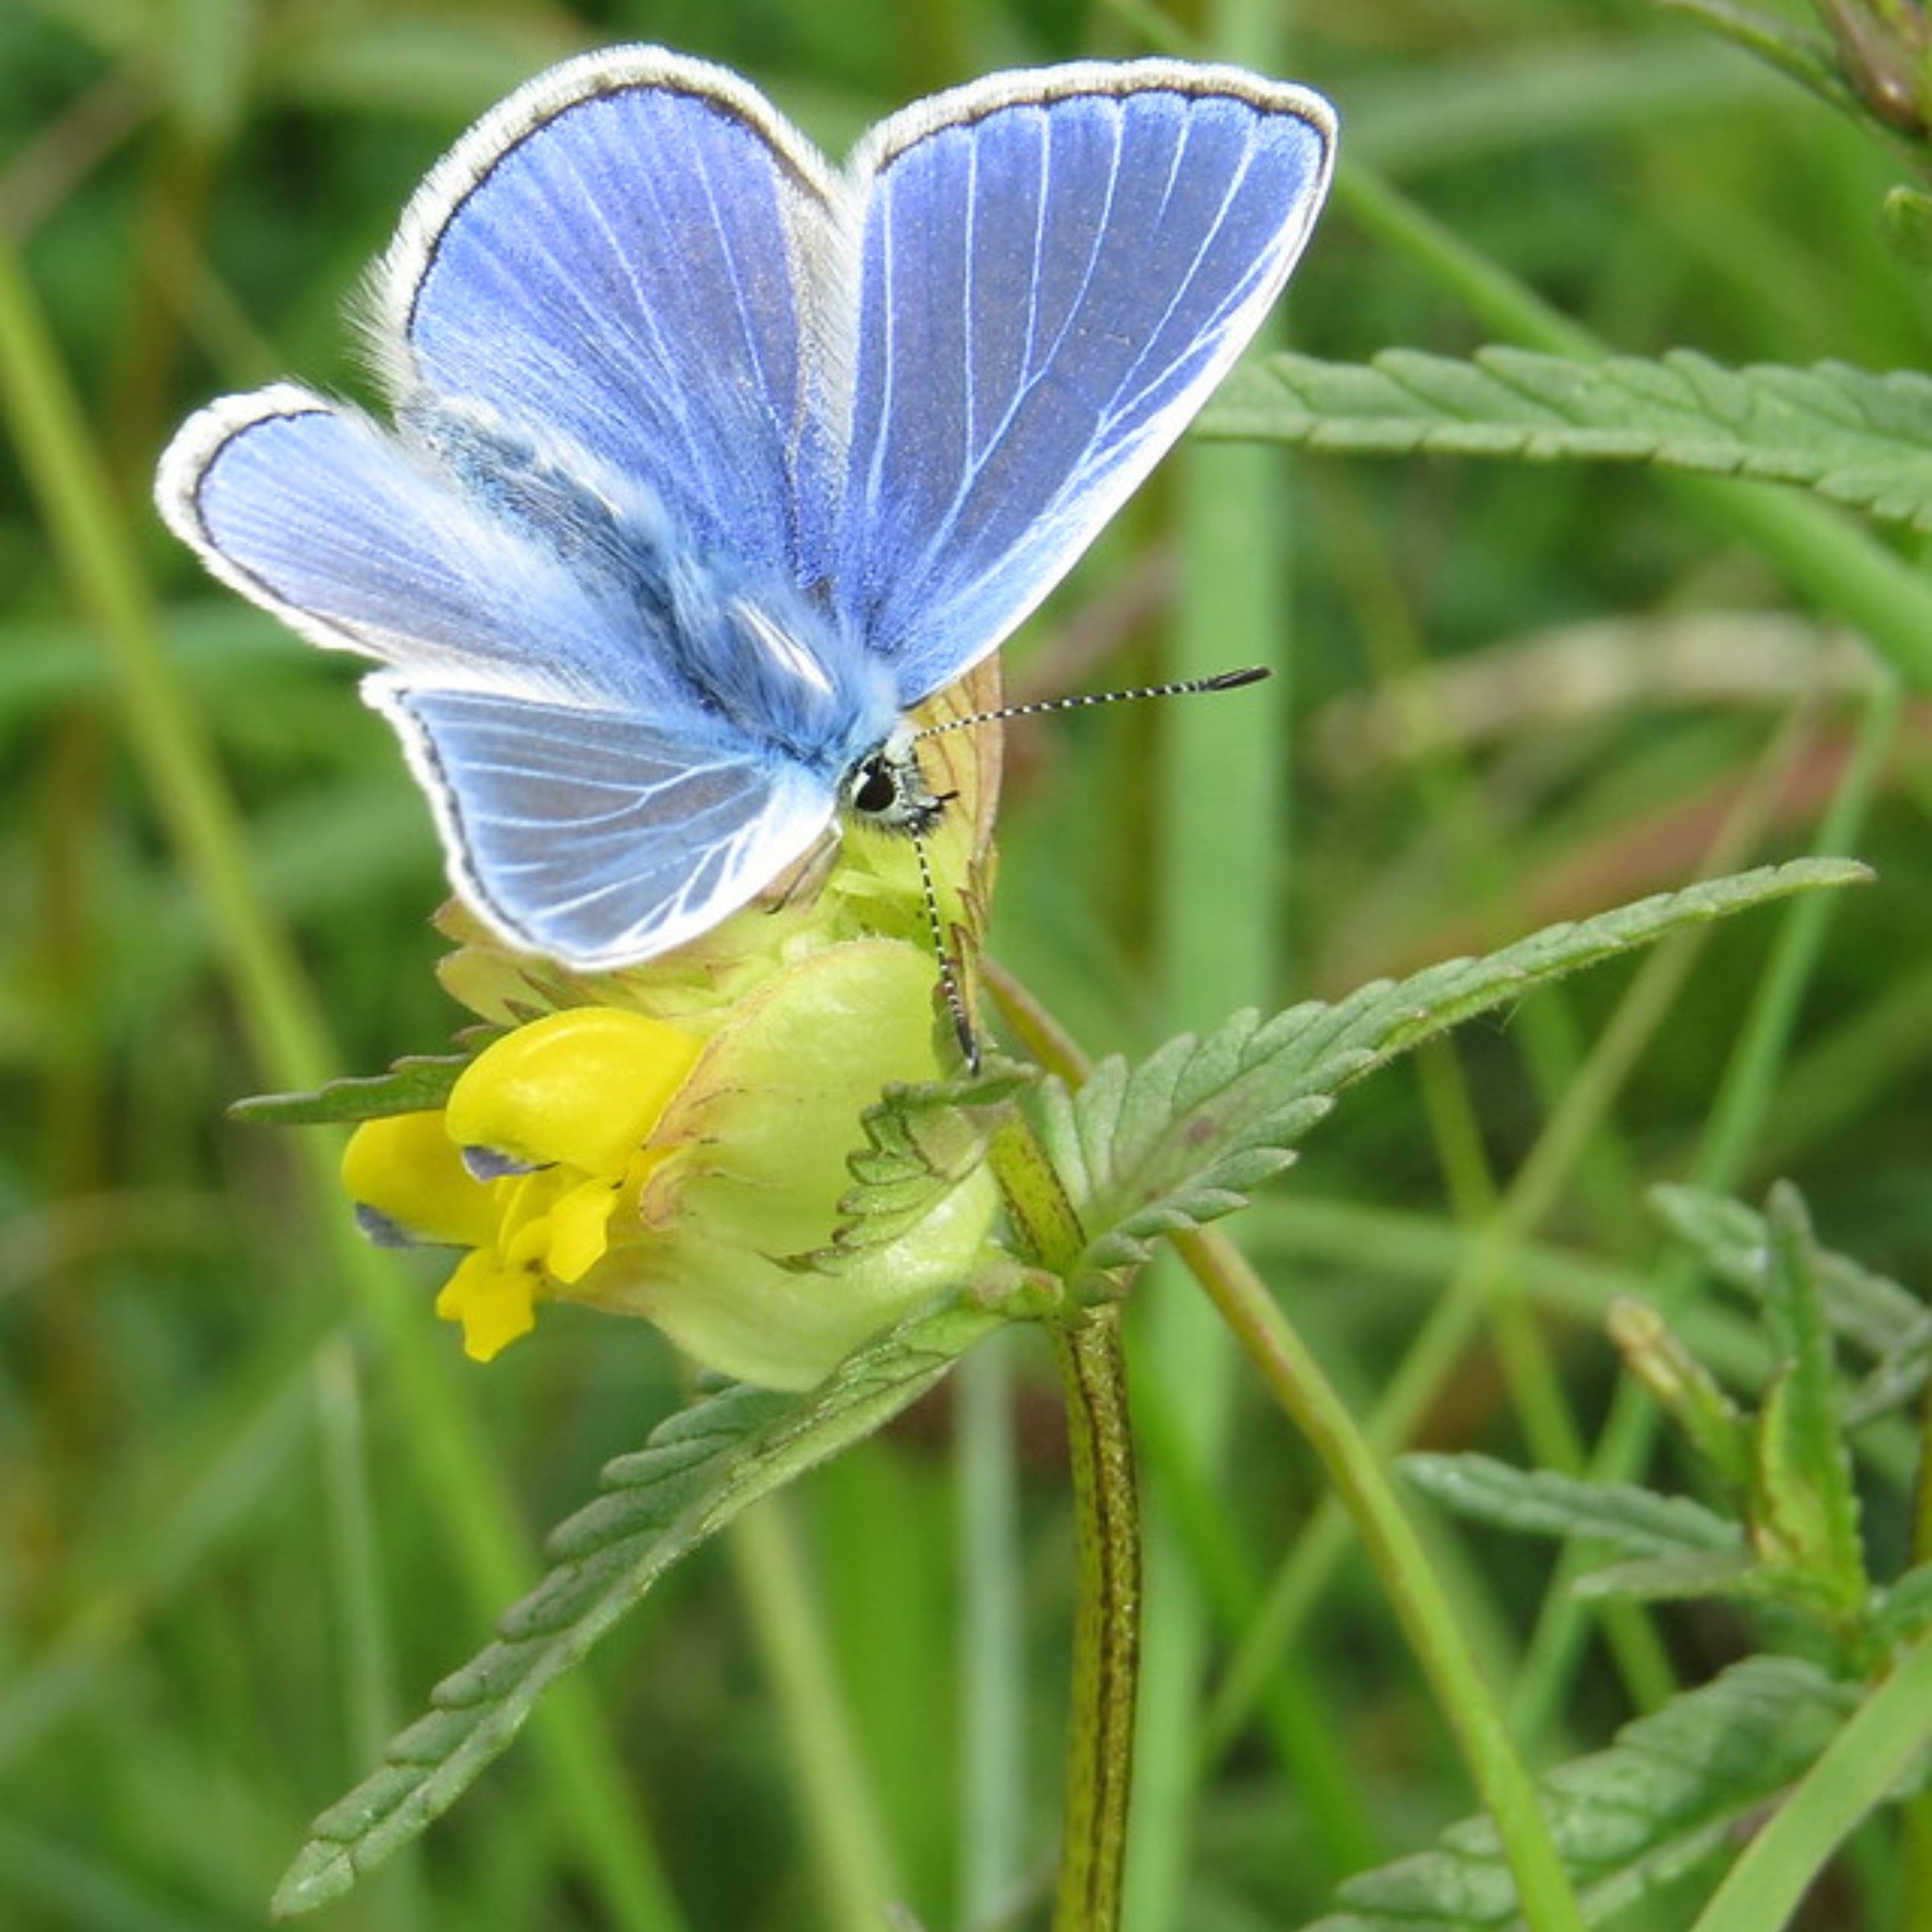 Blue british butterfly on yellow rattle plant